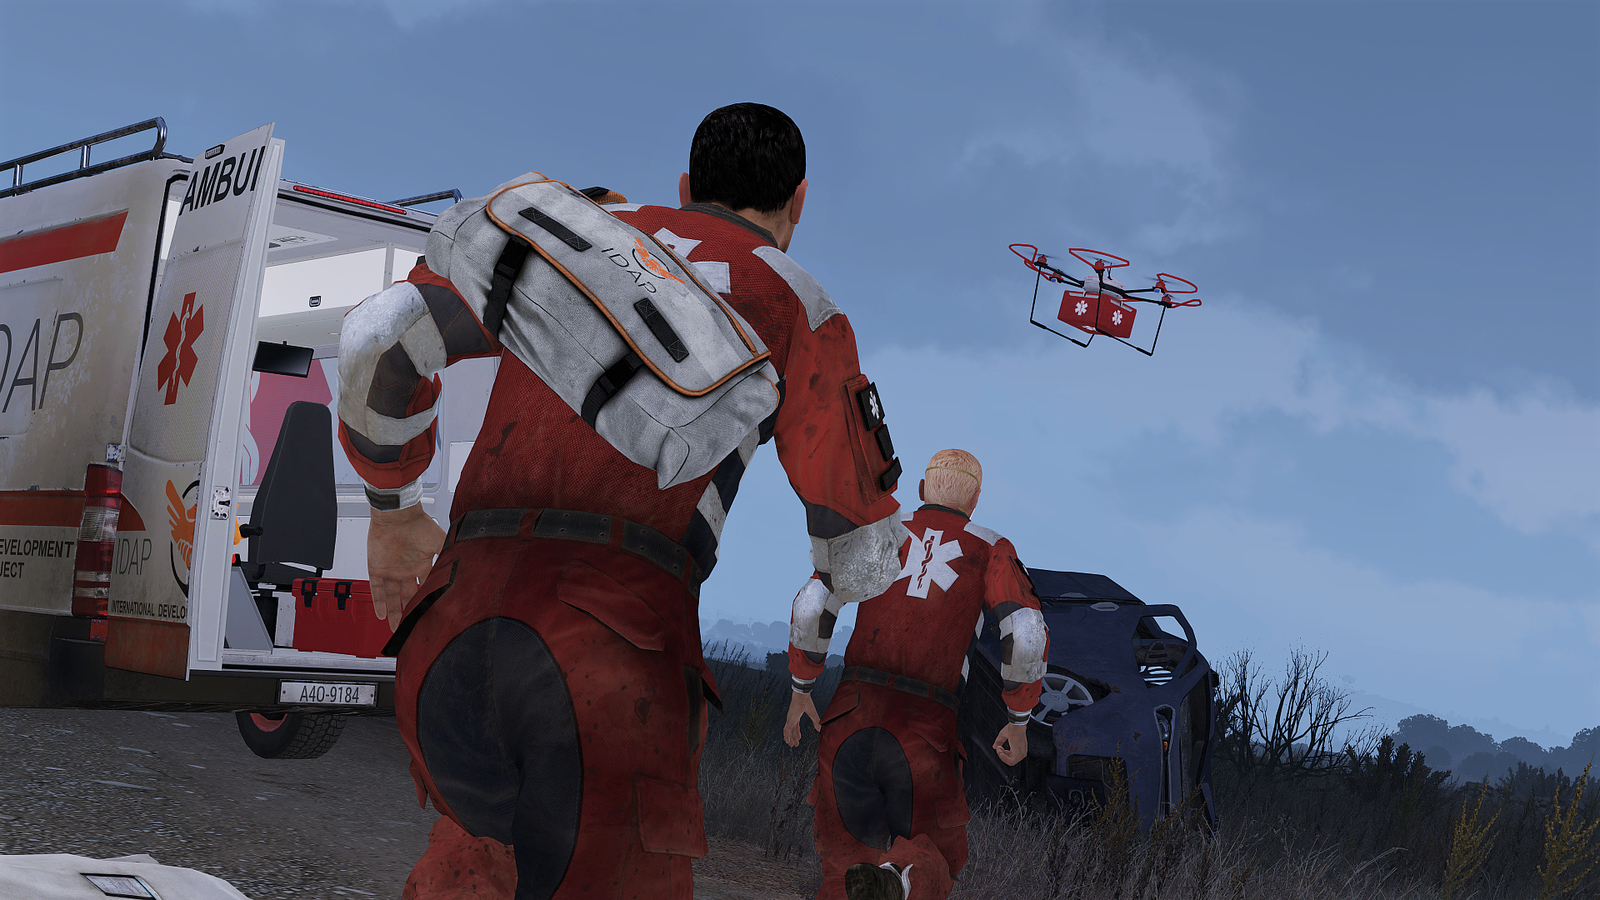 Arma 3 developers donate $176,000 to the Red Cross - Arma 3, , Bohemia Interactive, Red Cross, Addition, Donations, Kindness, news, Video